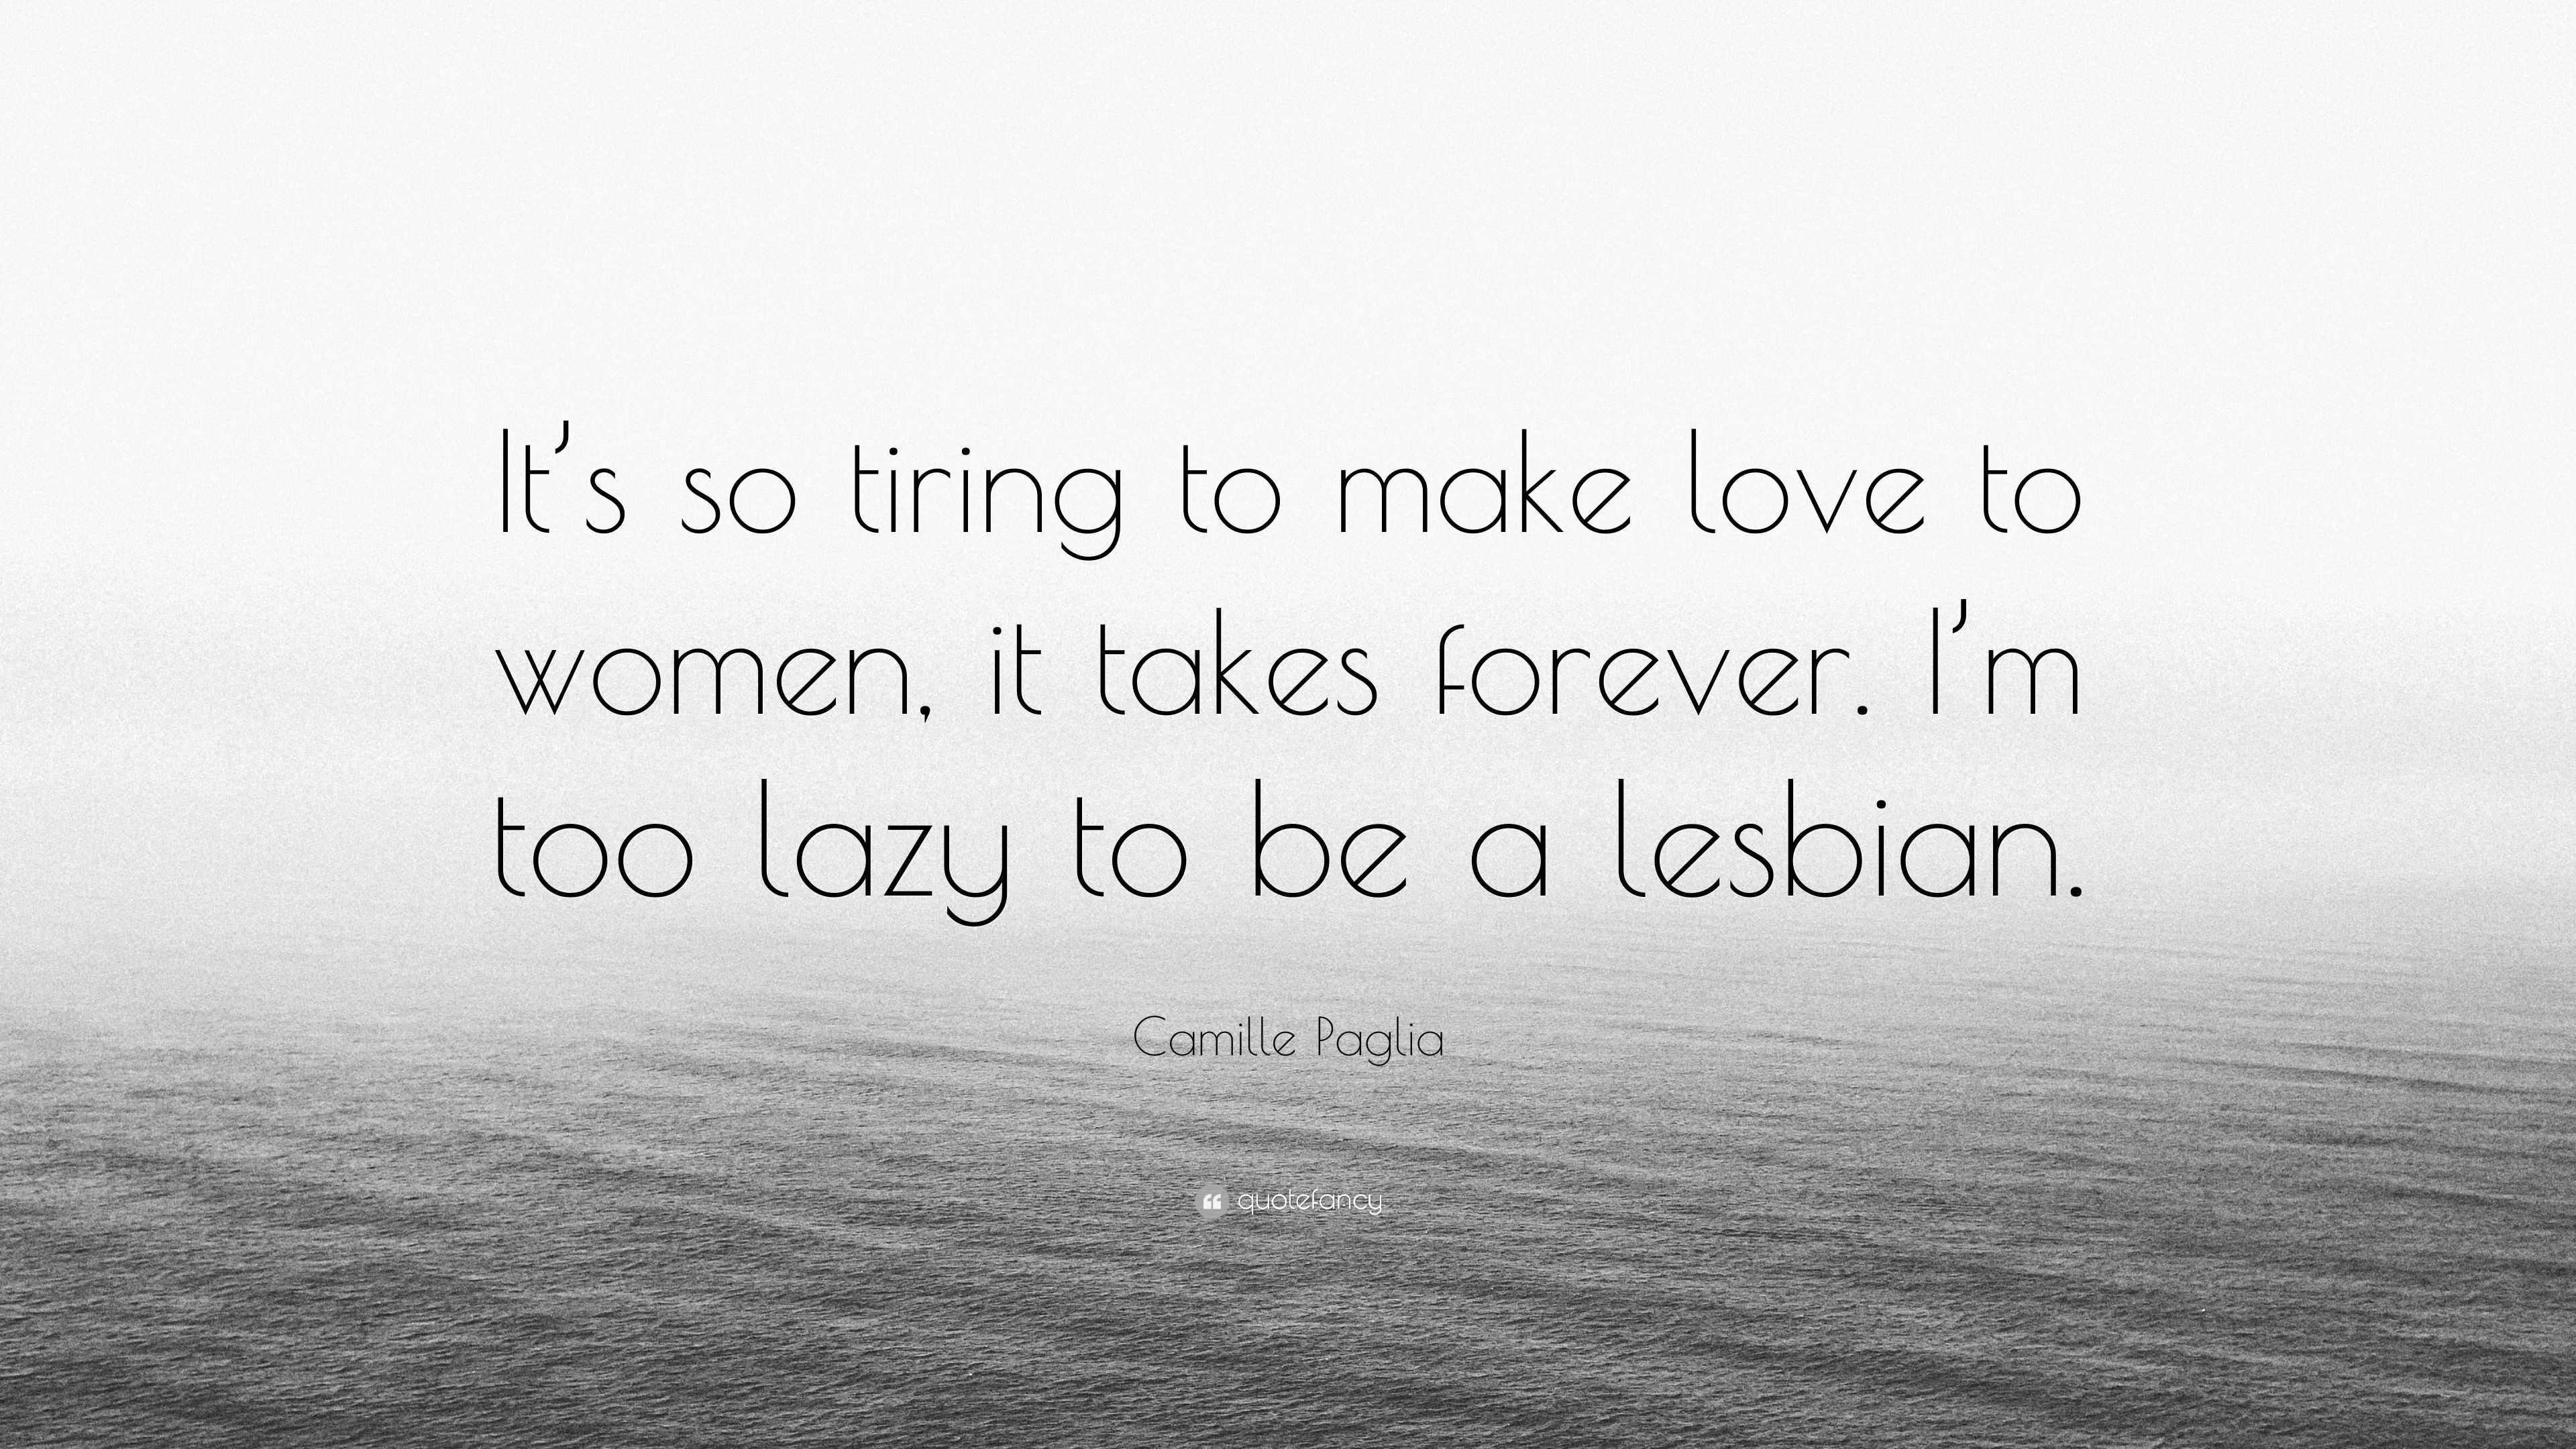 Camille Paglia Quote “It s so tiring to make love to women it takes